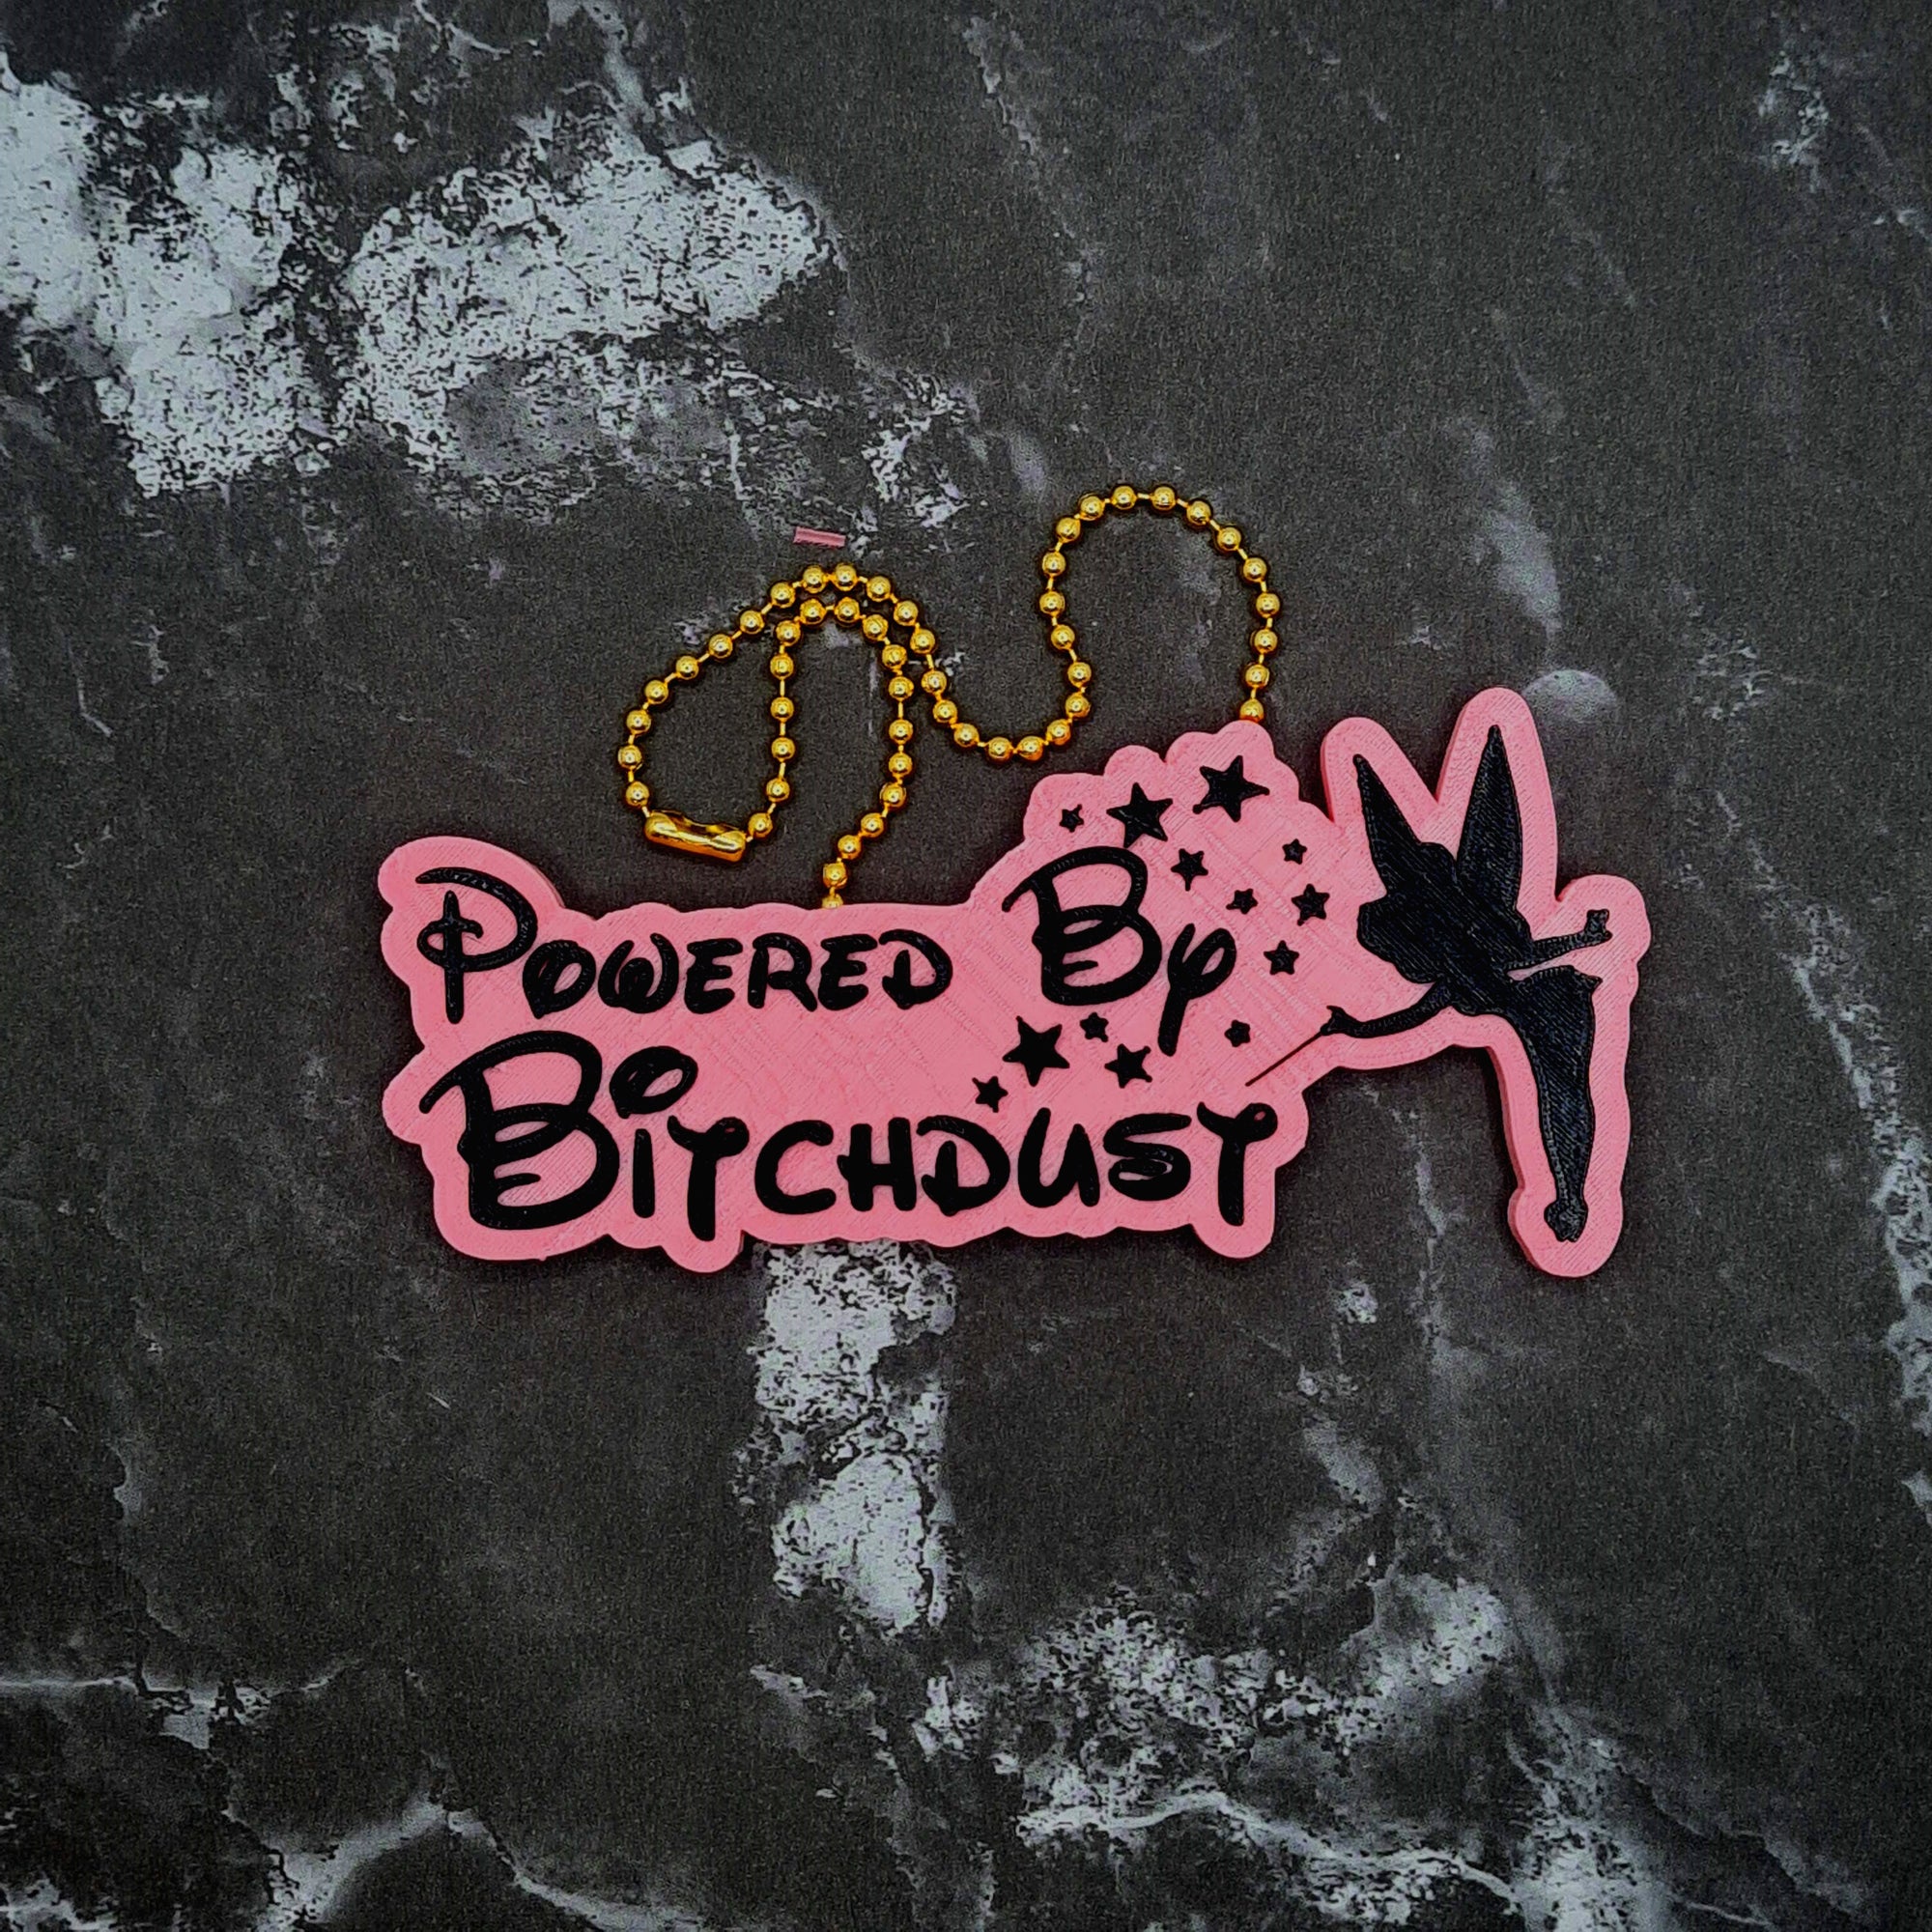 Powered by Bitchdust Charm!